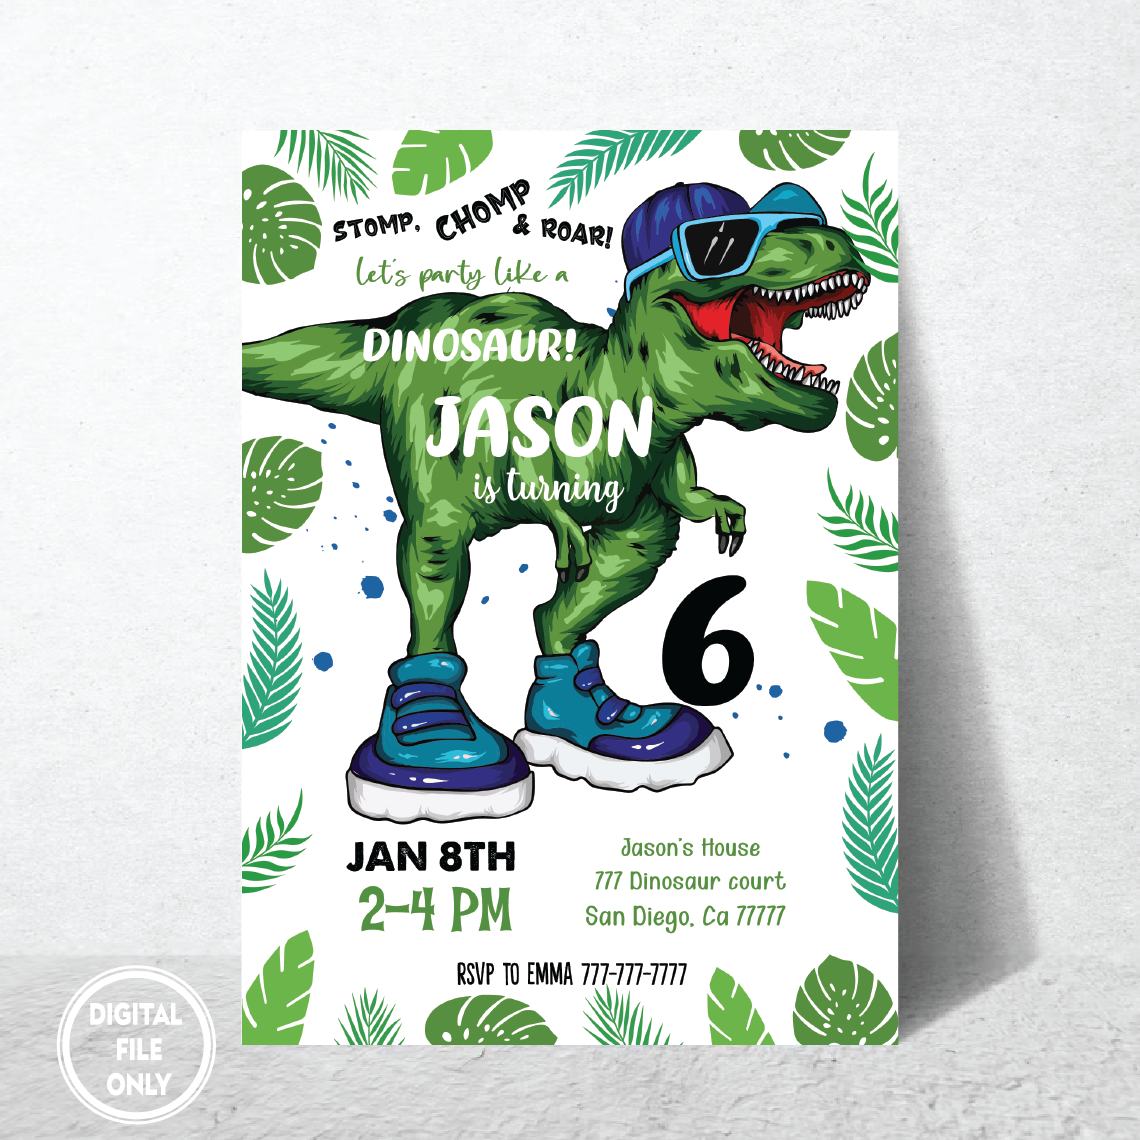 Personalized File Dinosaur Invitation Png, Dinosaur Birthday Invites Png, Instant Download Dinosaur Invitations PNG File Only